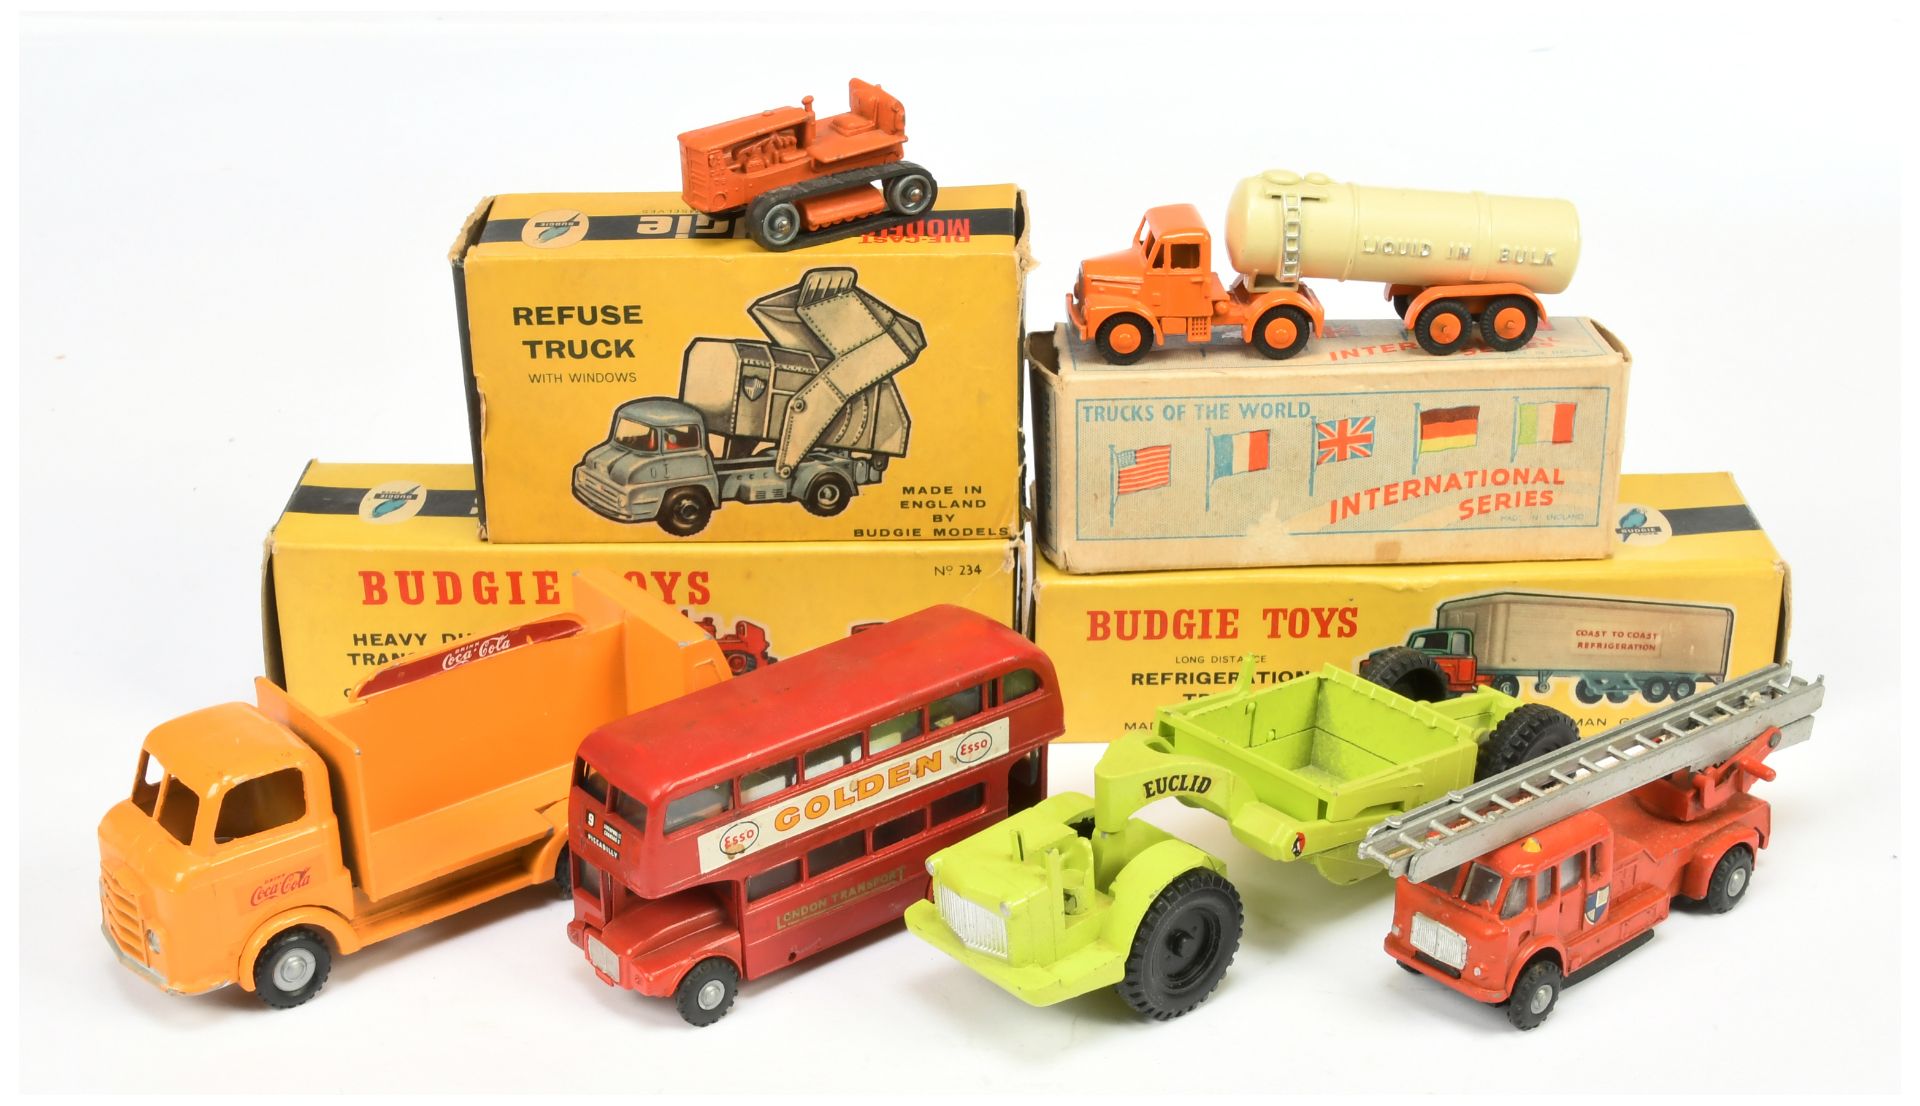 Morestone & Budgie Toys Group To Include Morestone Tanker - Good Plus in a Good carded box, Budgi...